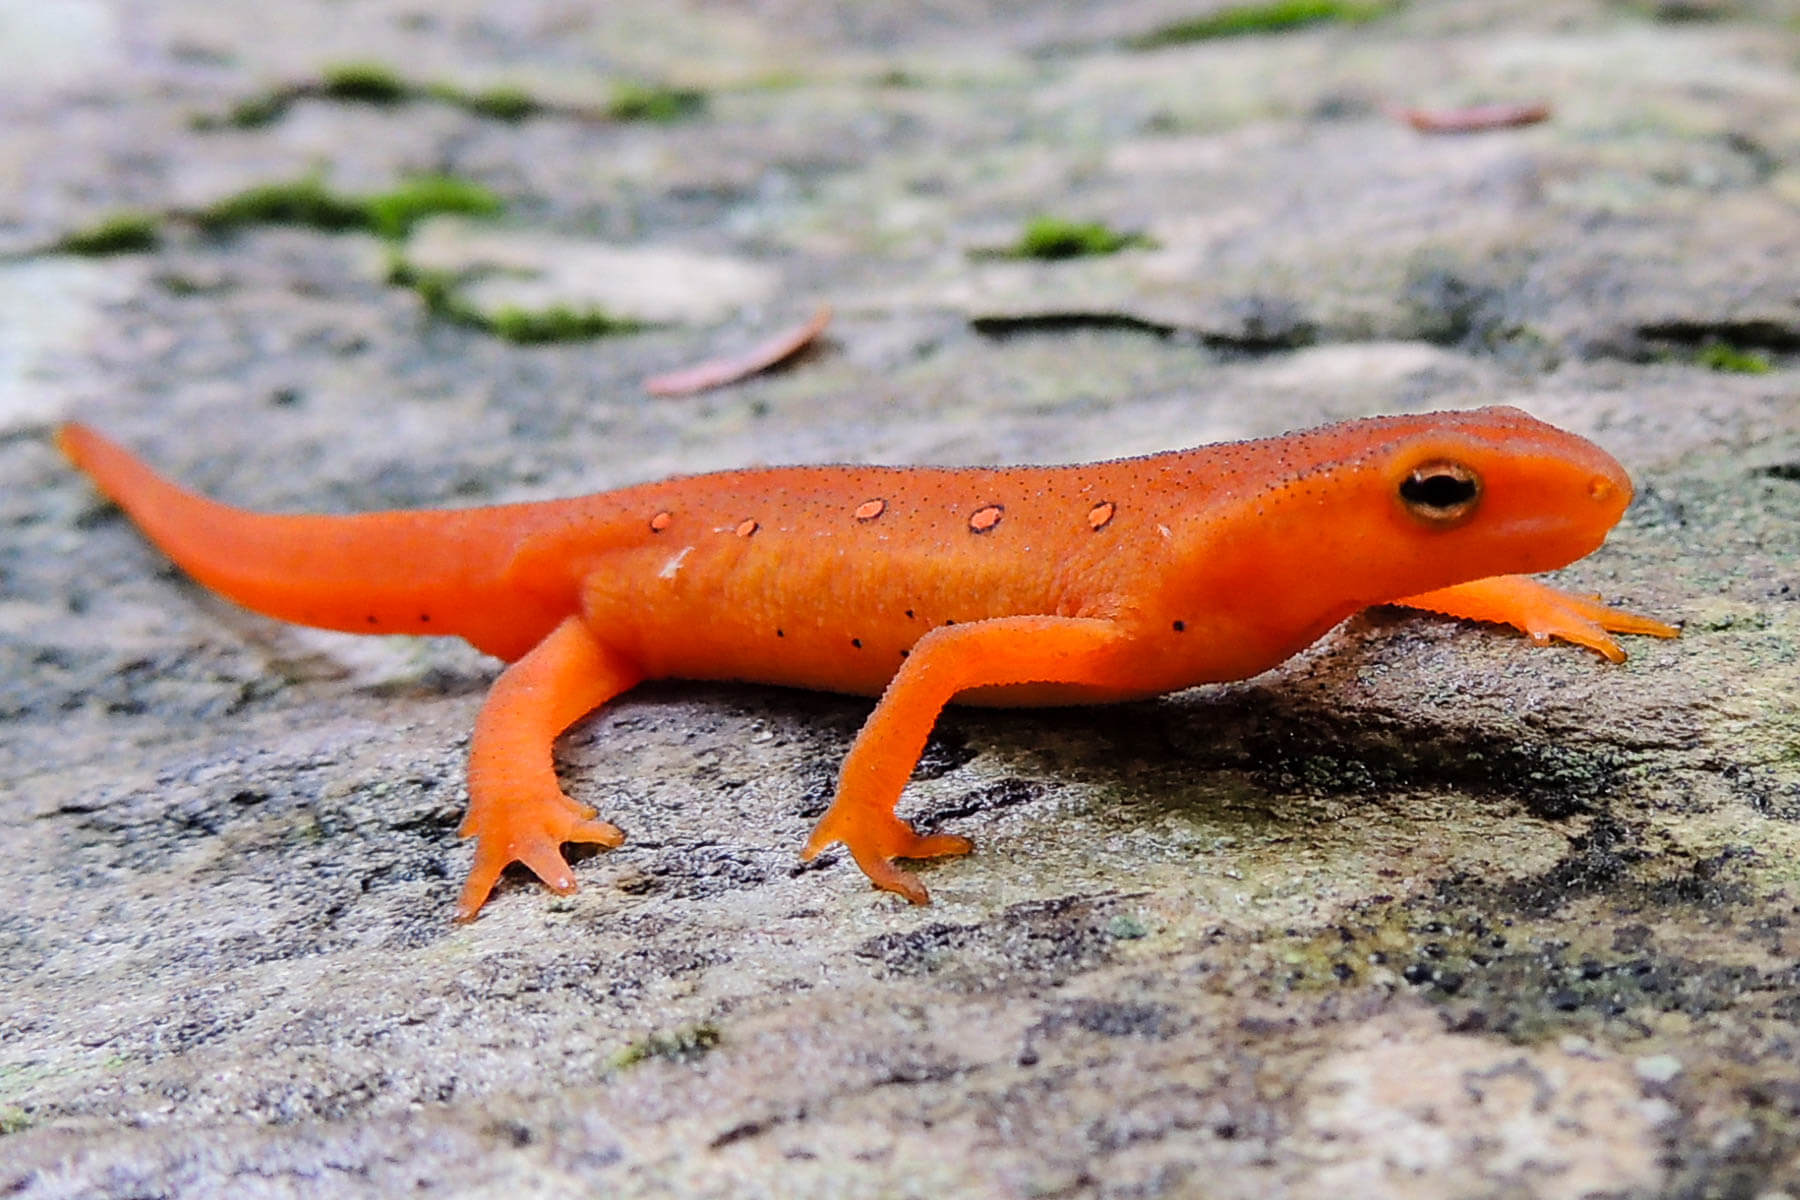 The red eft is the bright orange, eastern newt in its juvenile stage.